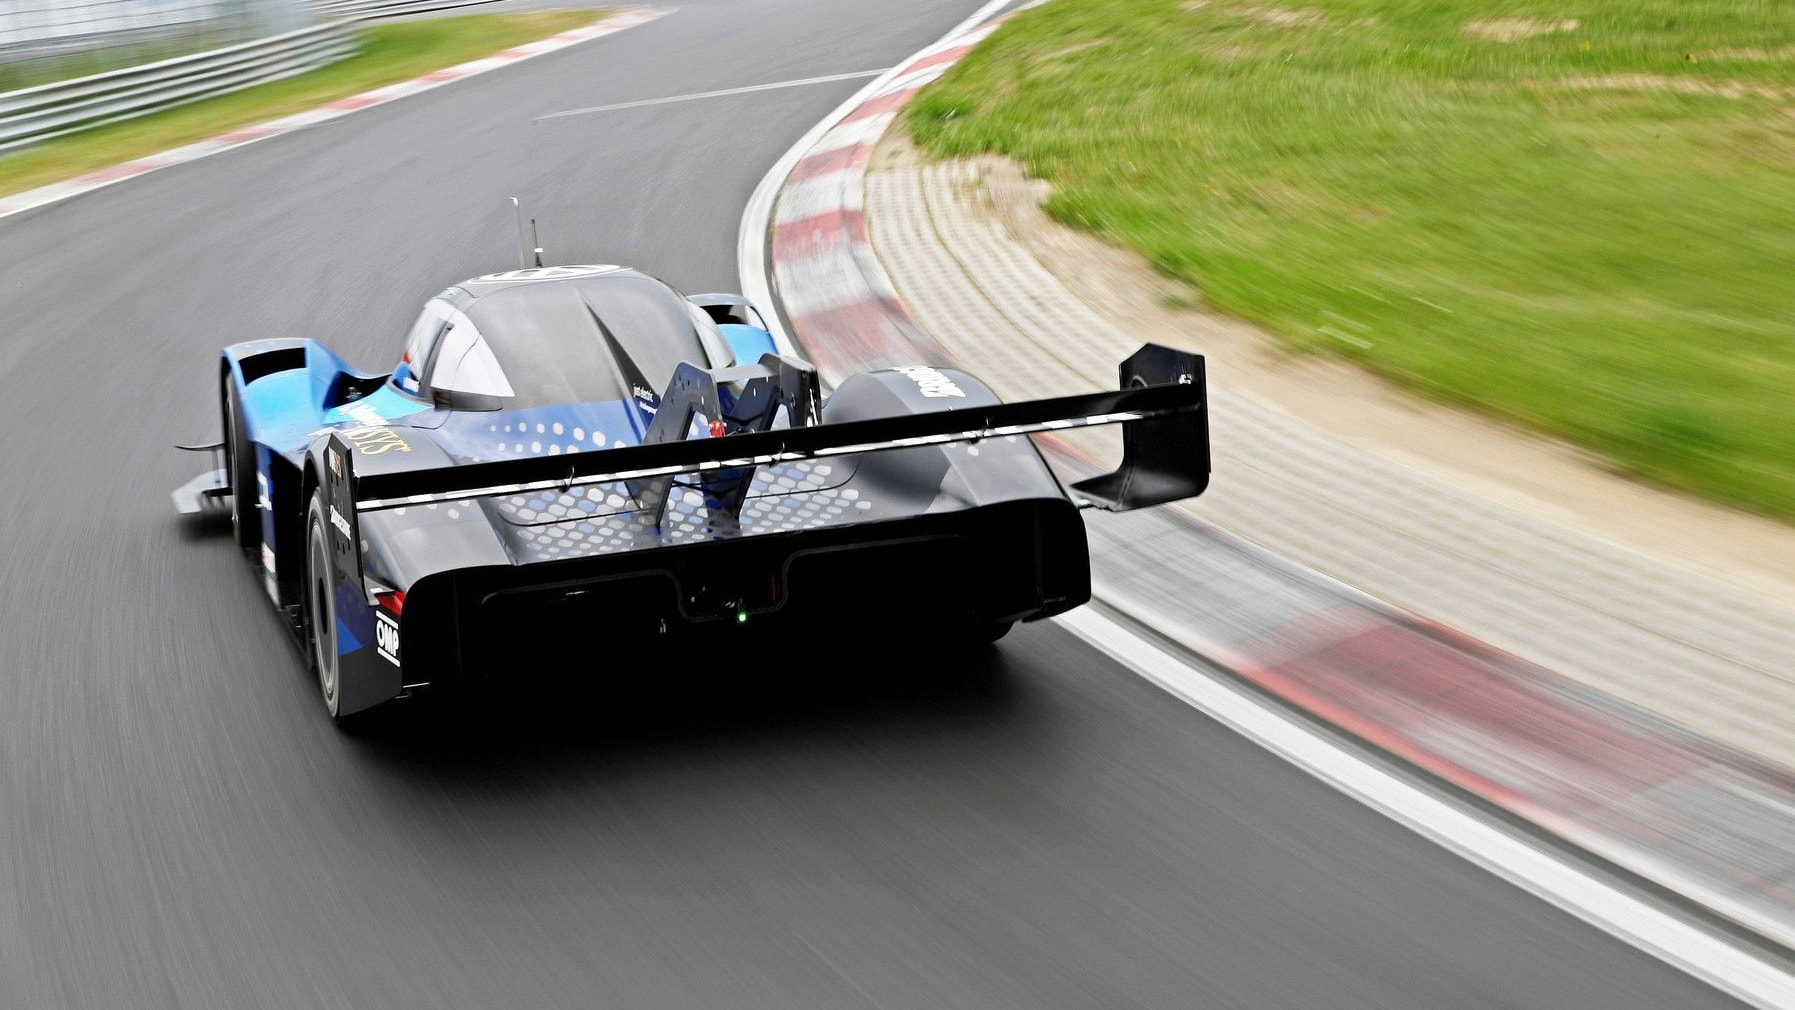 Volkswagen ID R electric race car sets Nurburgring lap records